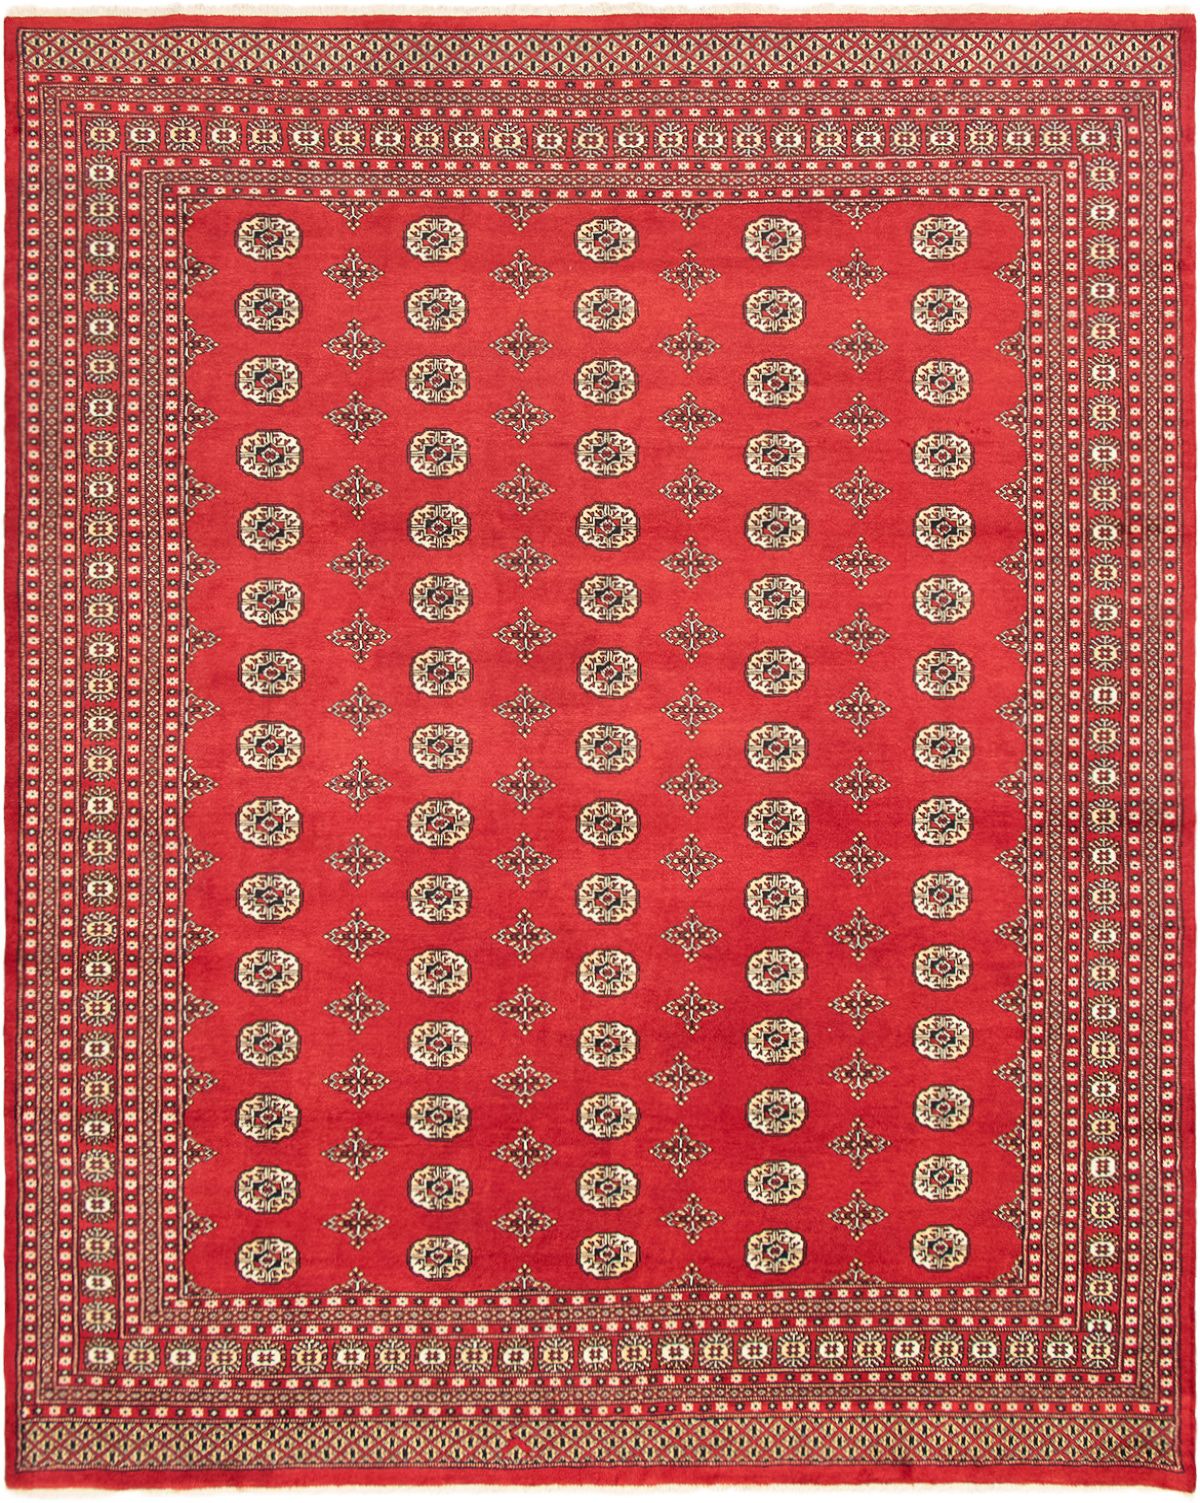 Hand-knotted Finest Peshawar Bokhara Red Wool Rug 9'2" x 11'7" Size: 9'2" x 11'7"  